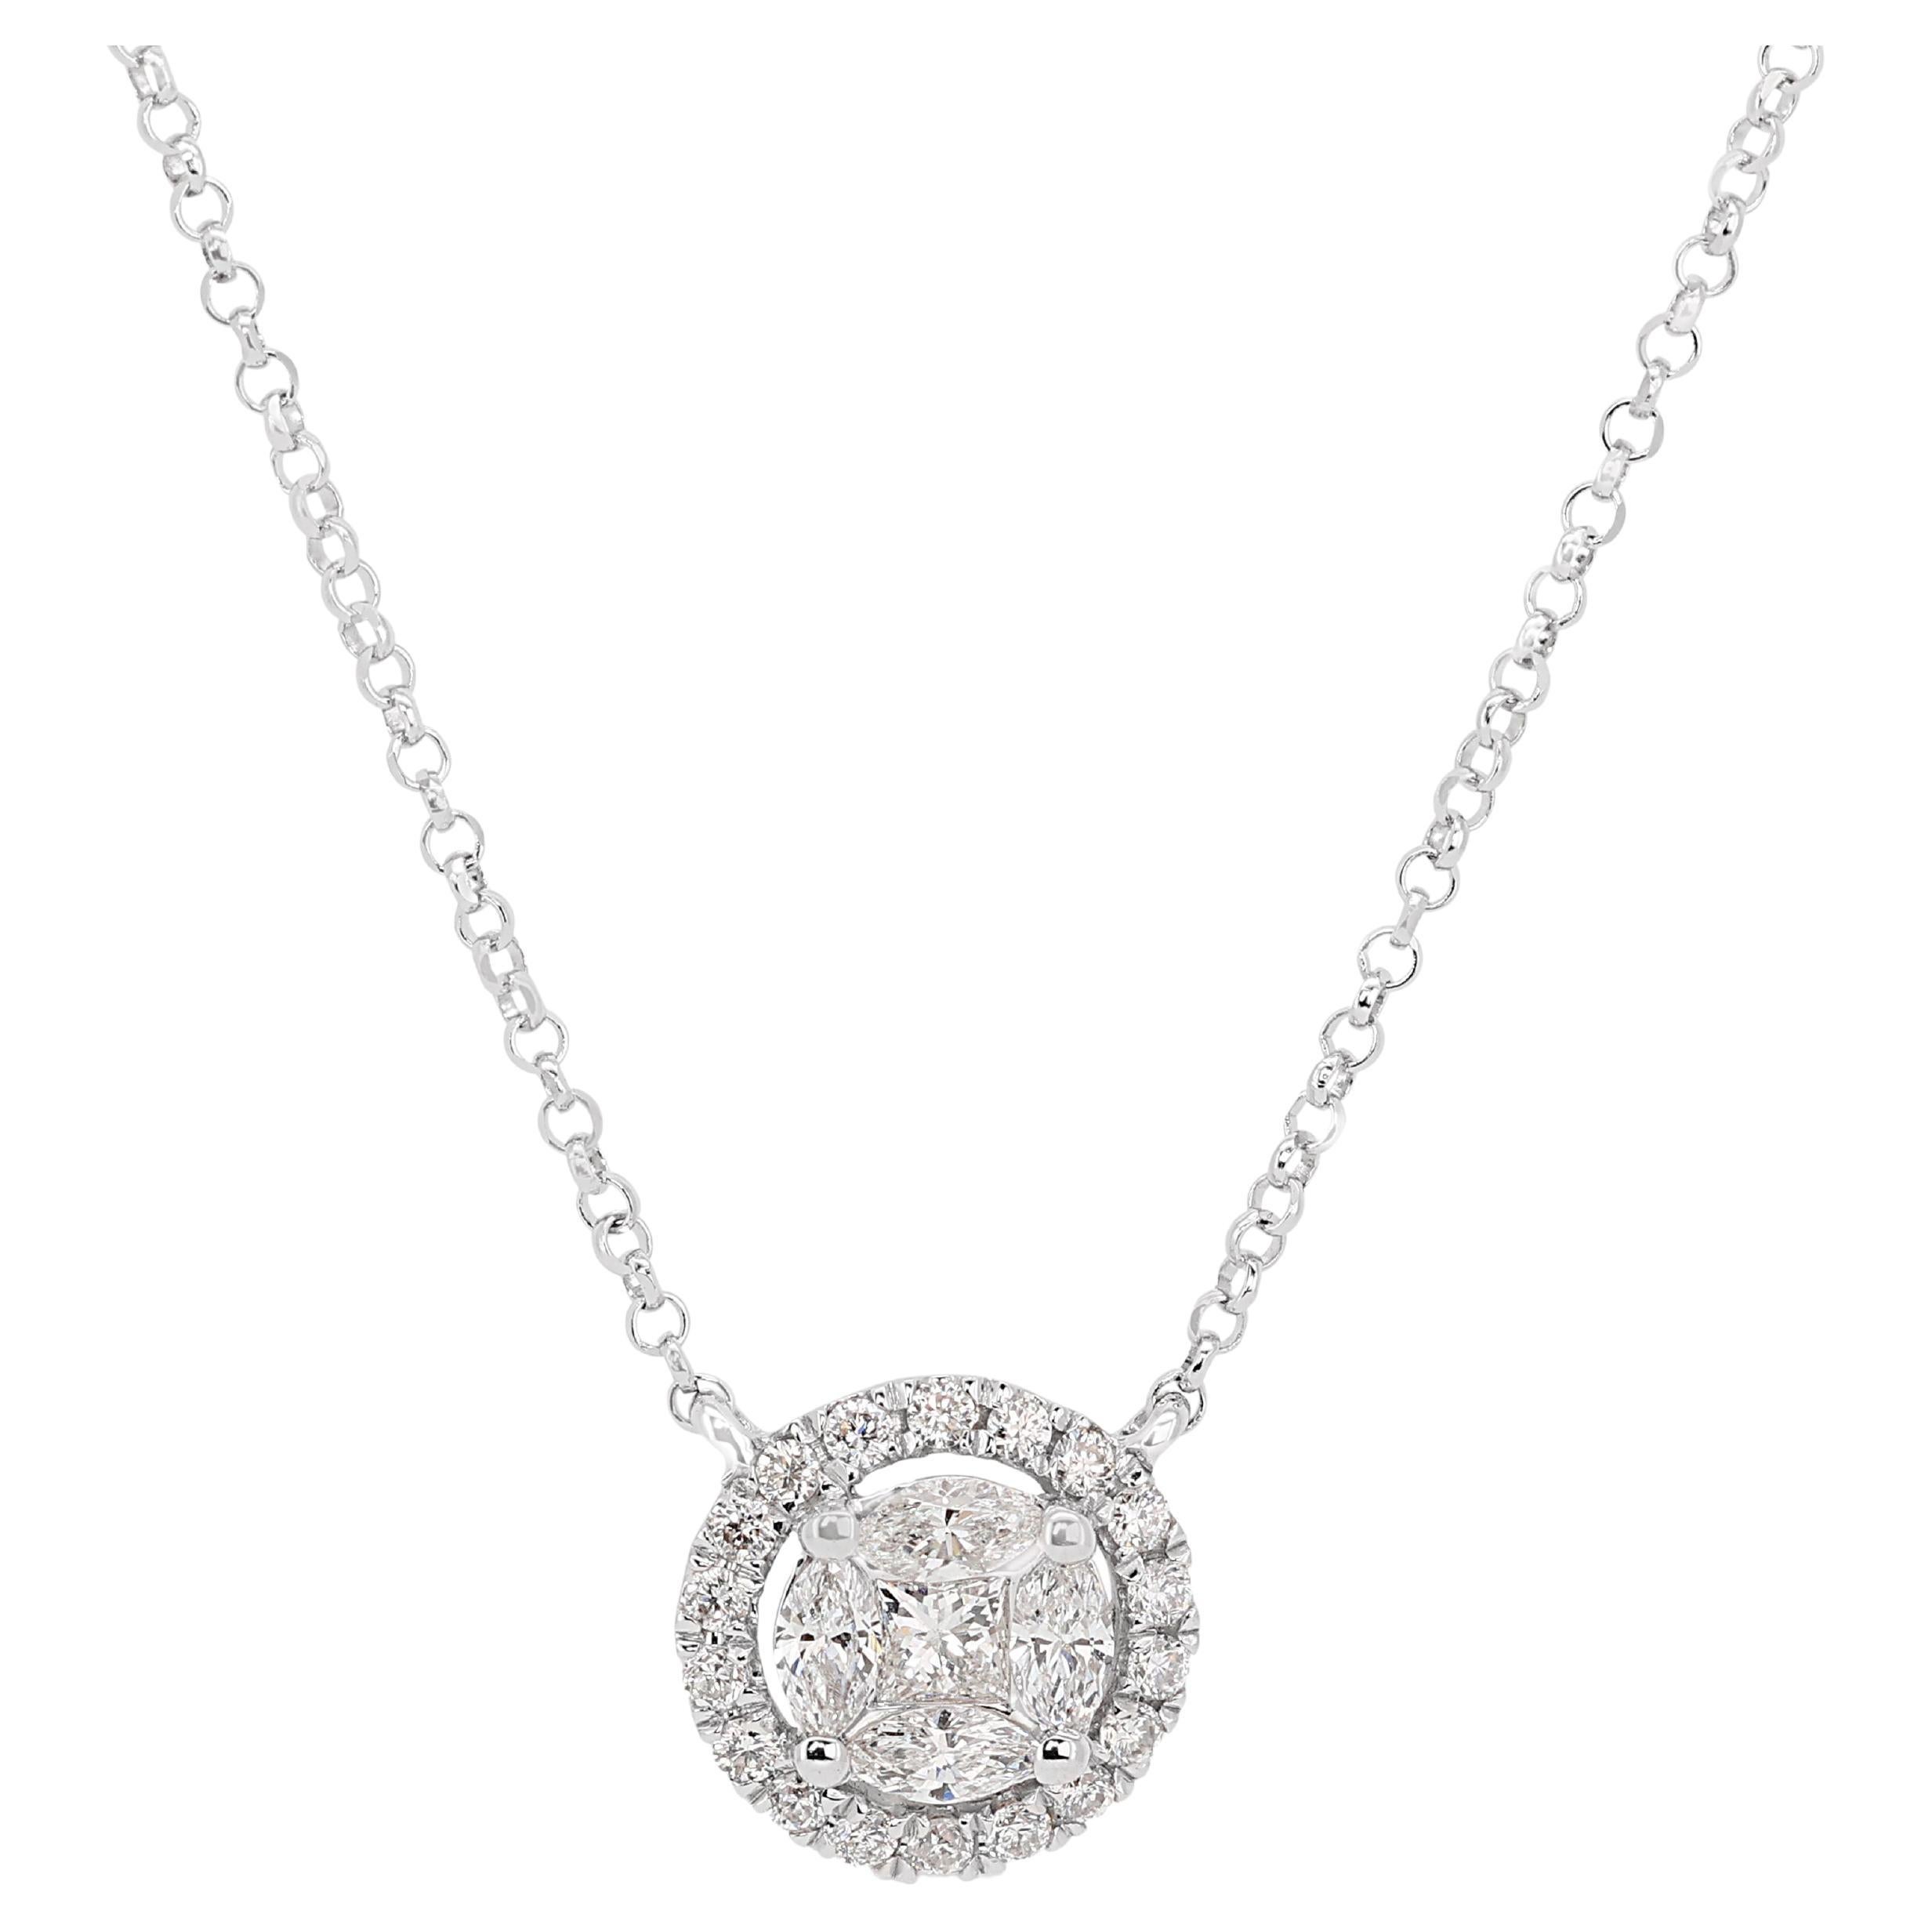 18K White Gold Diamond Necklace with 0.24 total carat weight